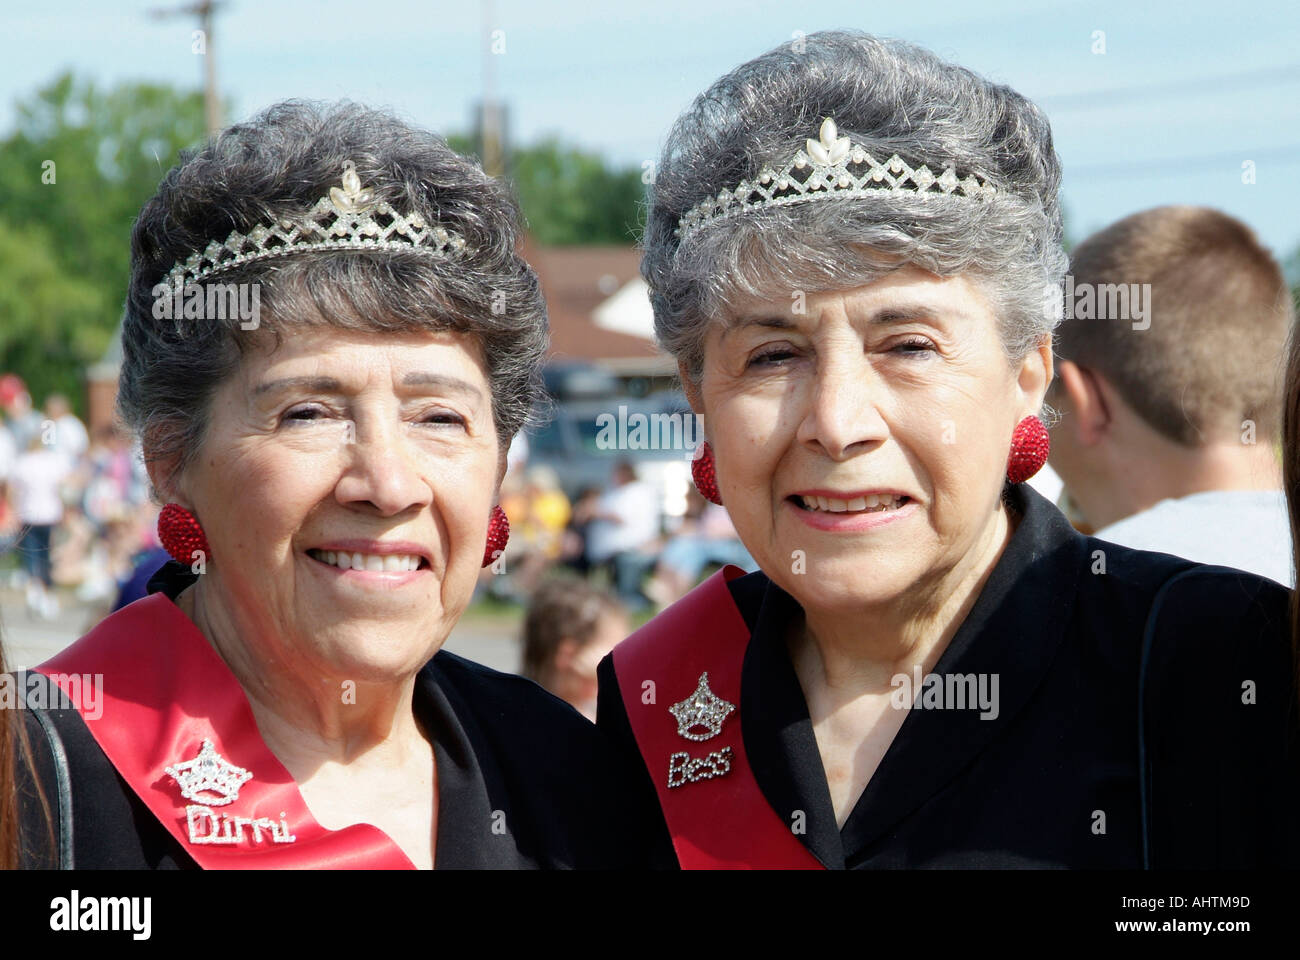 Twins Convention at Twinsburg Ohio Stock Photo